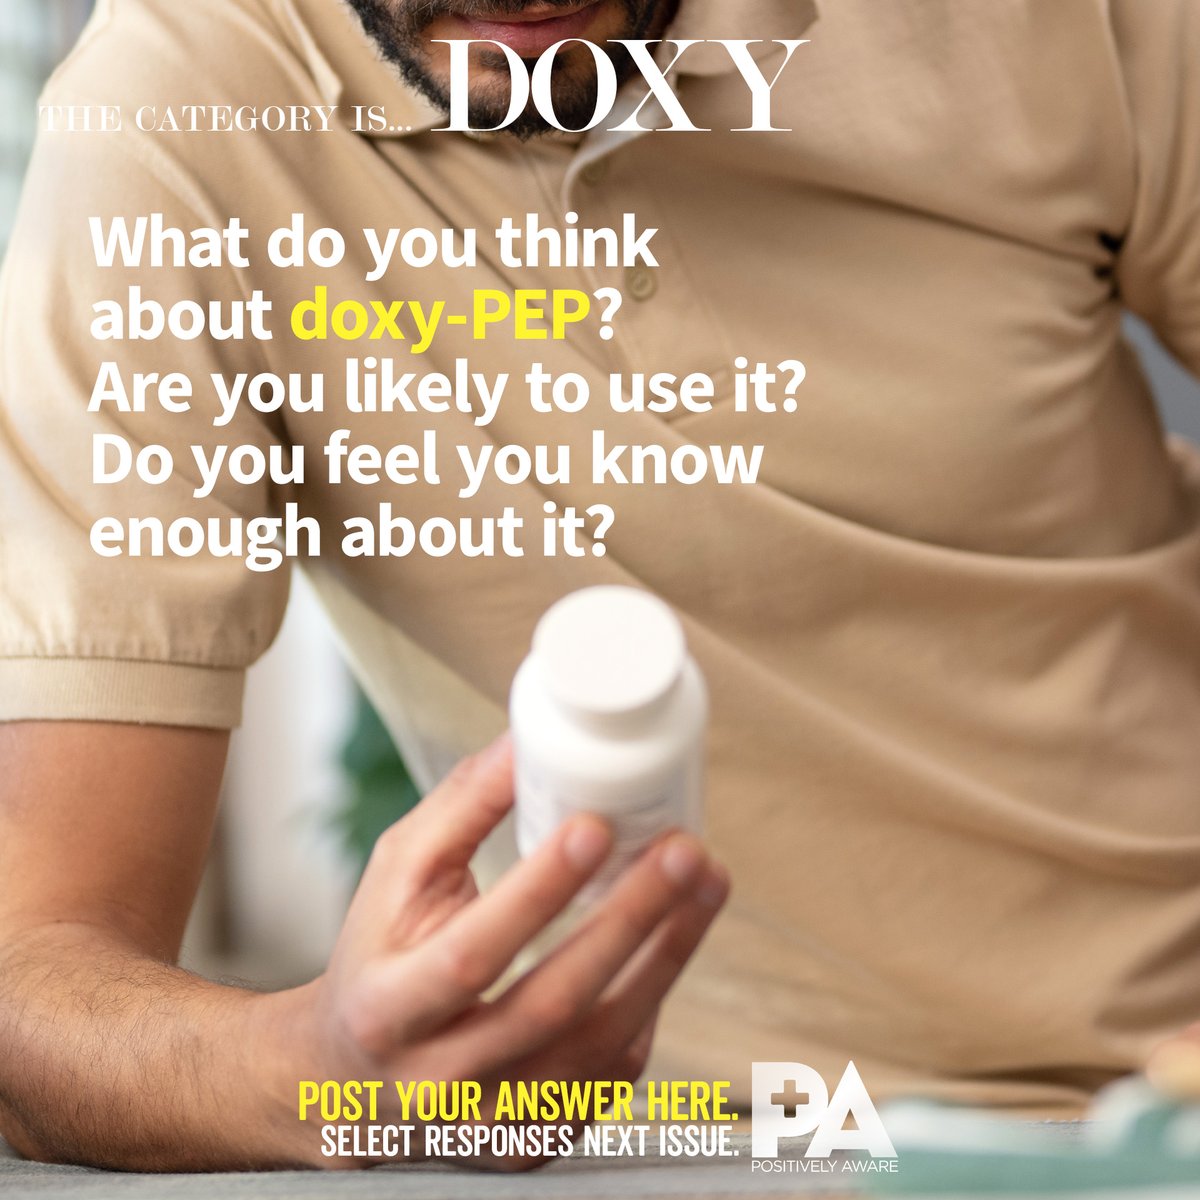 The oral antibiotic doxycycline has been shown to reduce sexually transmitted infections by two-thirds in MSMs when taken within 72 hours. @PosAware magazine wants to know: What do you think about doxy-PEP? Do you feel you know enough about doxy-PEP? Are you likely to use it?